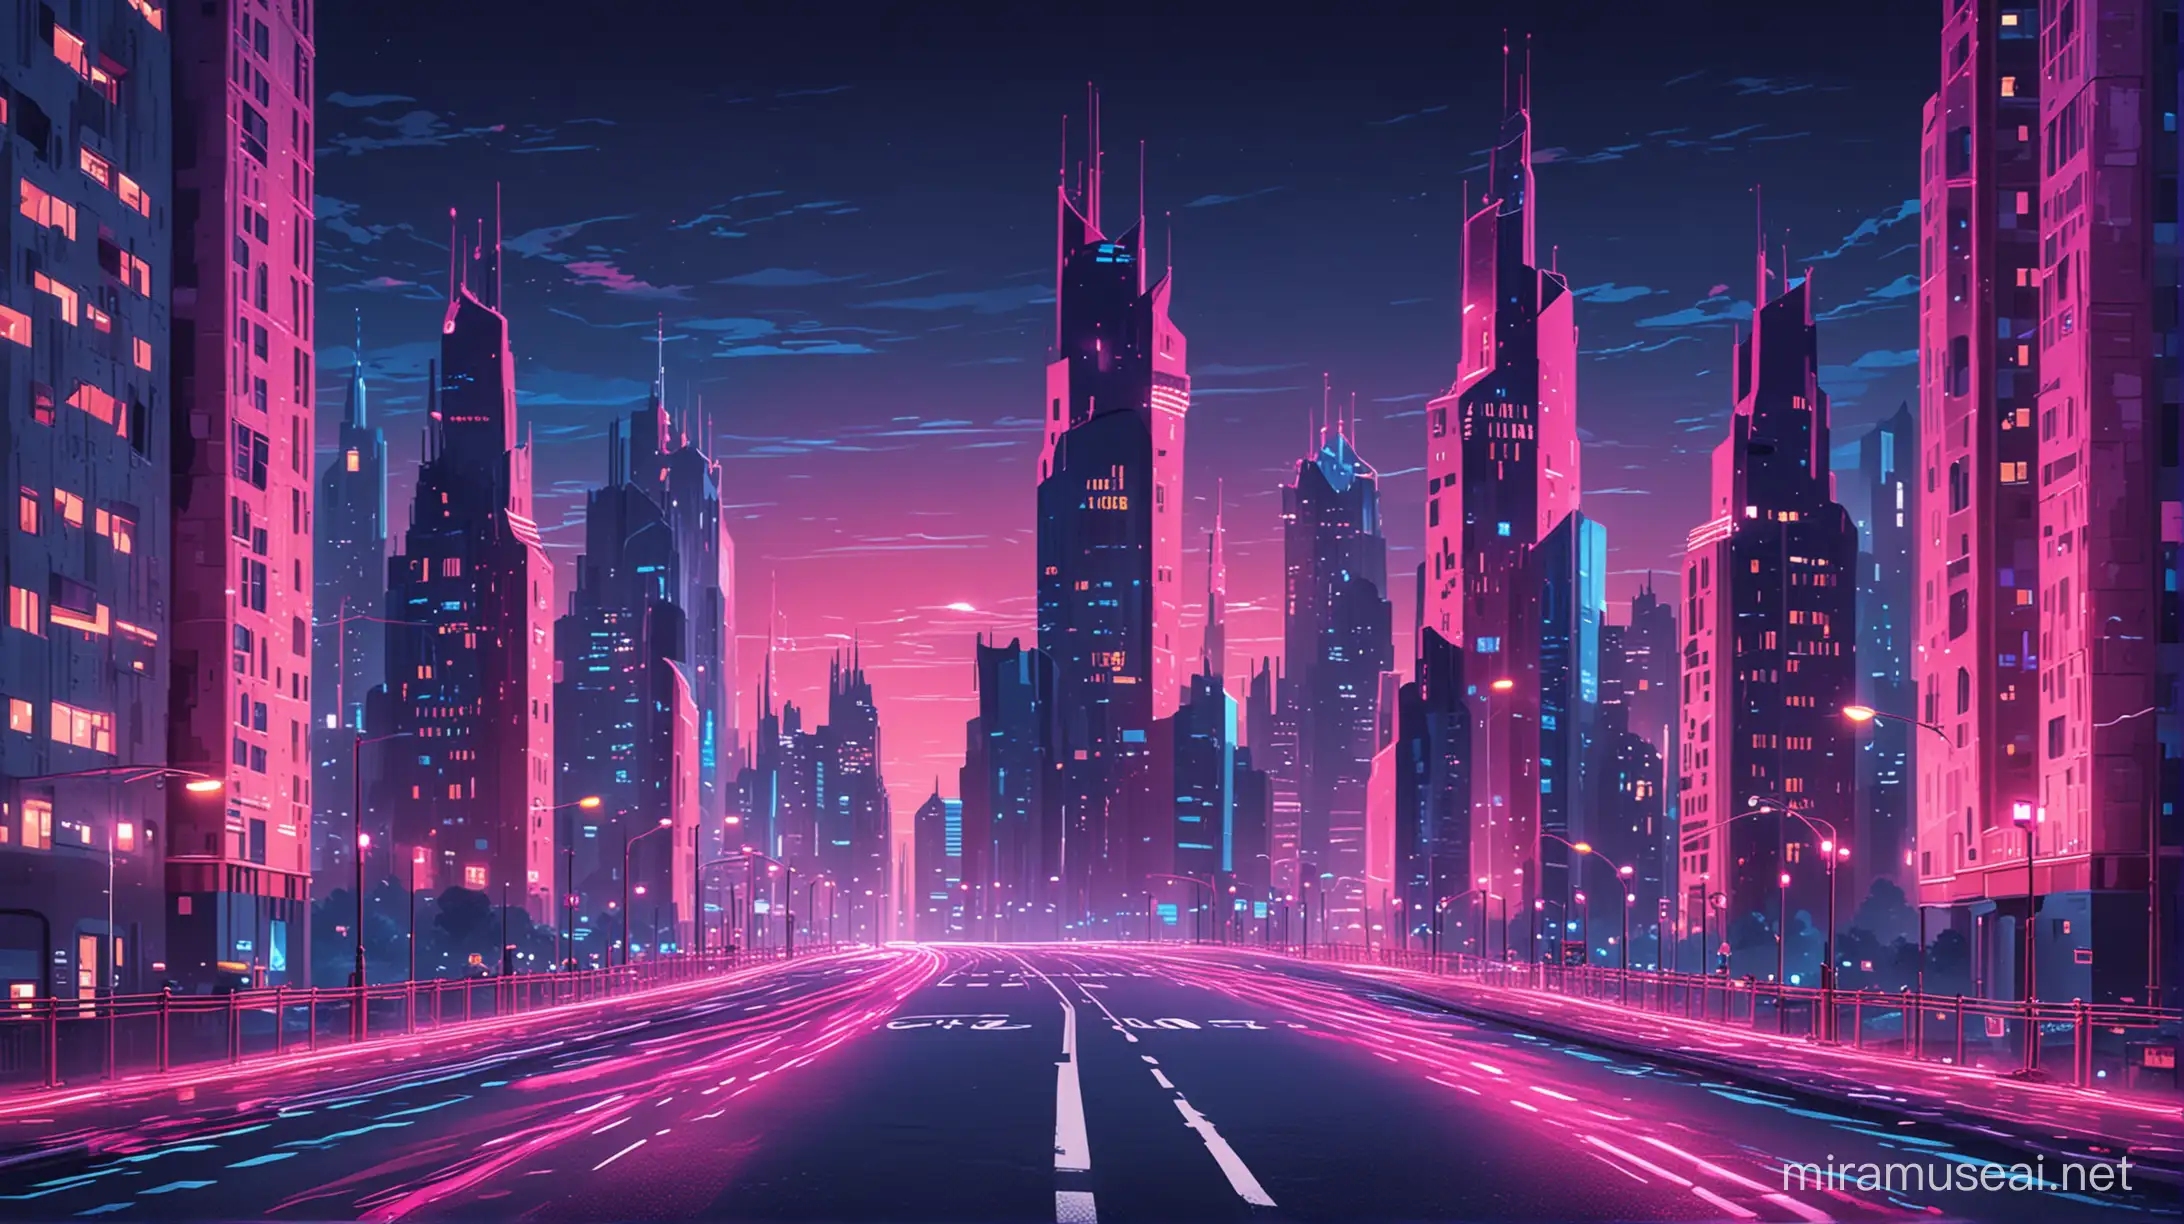 night cartoon modern city road in blue, pink lights around the towers